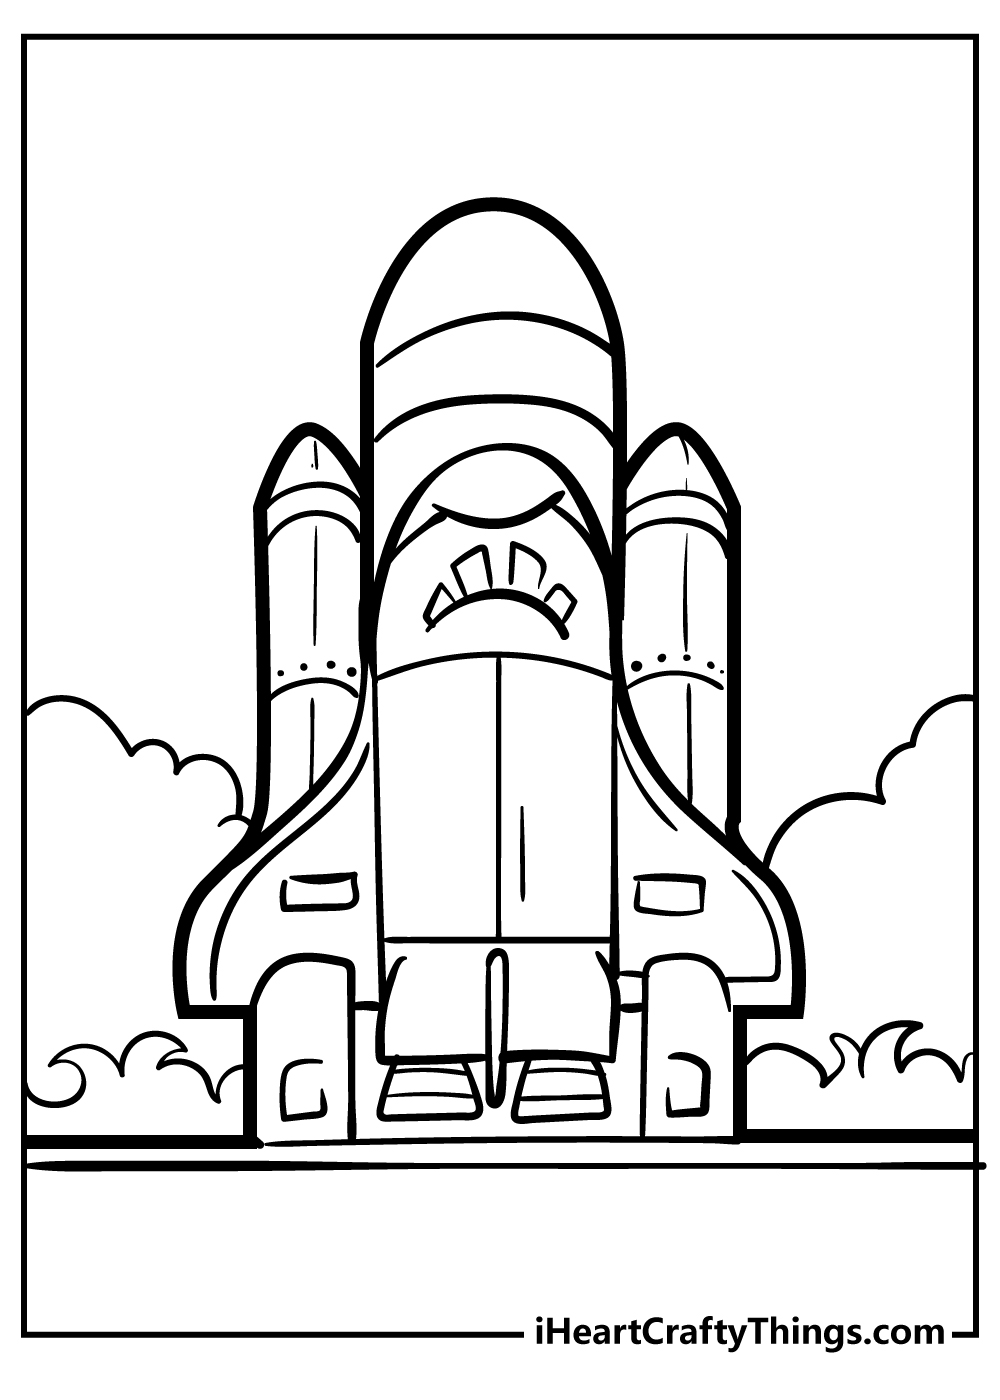 Rocket Easy Coloring Pages